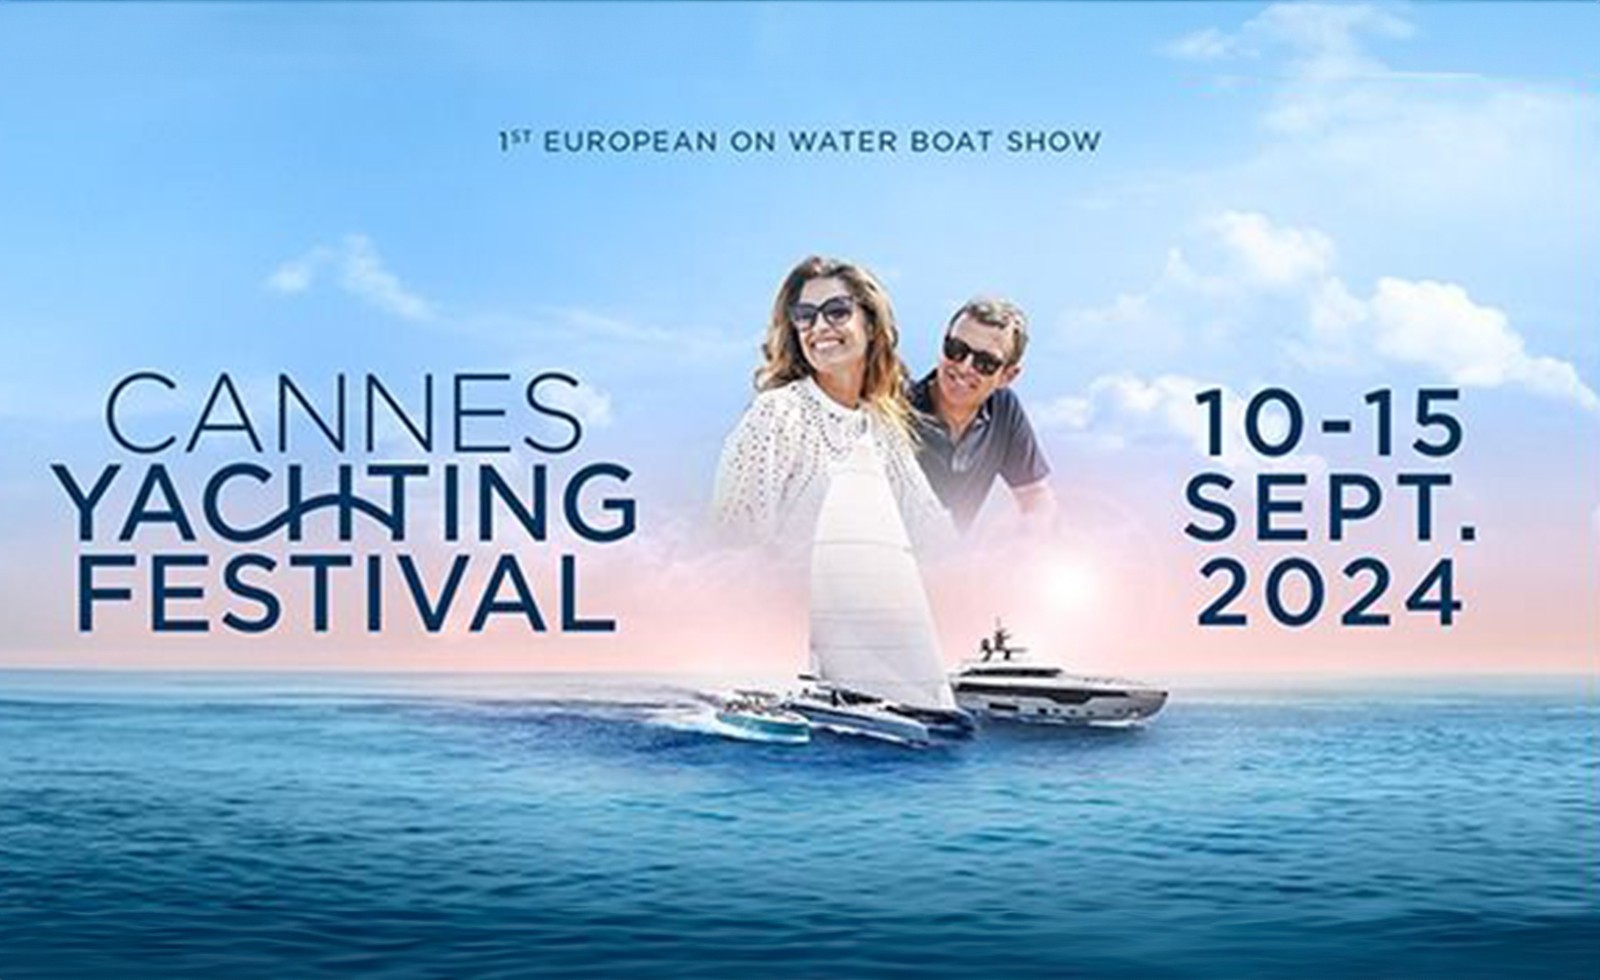 Soproyachts at the Cannes Yachting Festival 2024